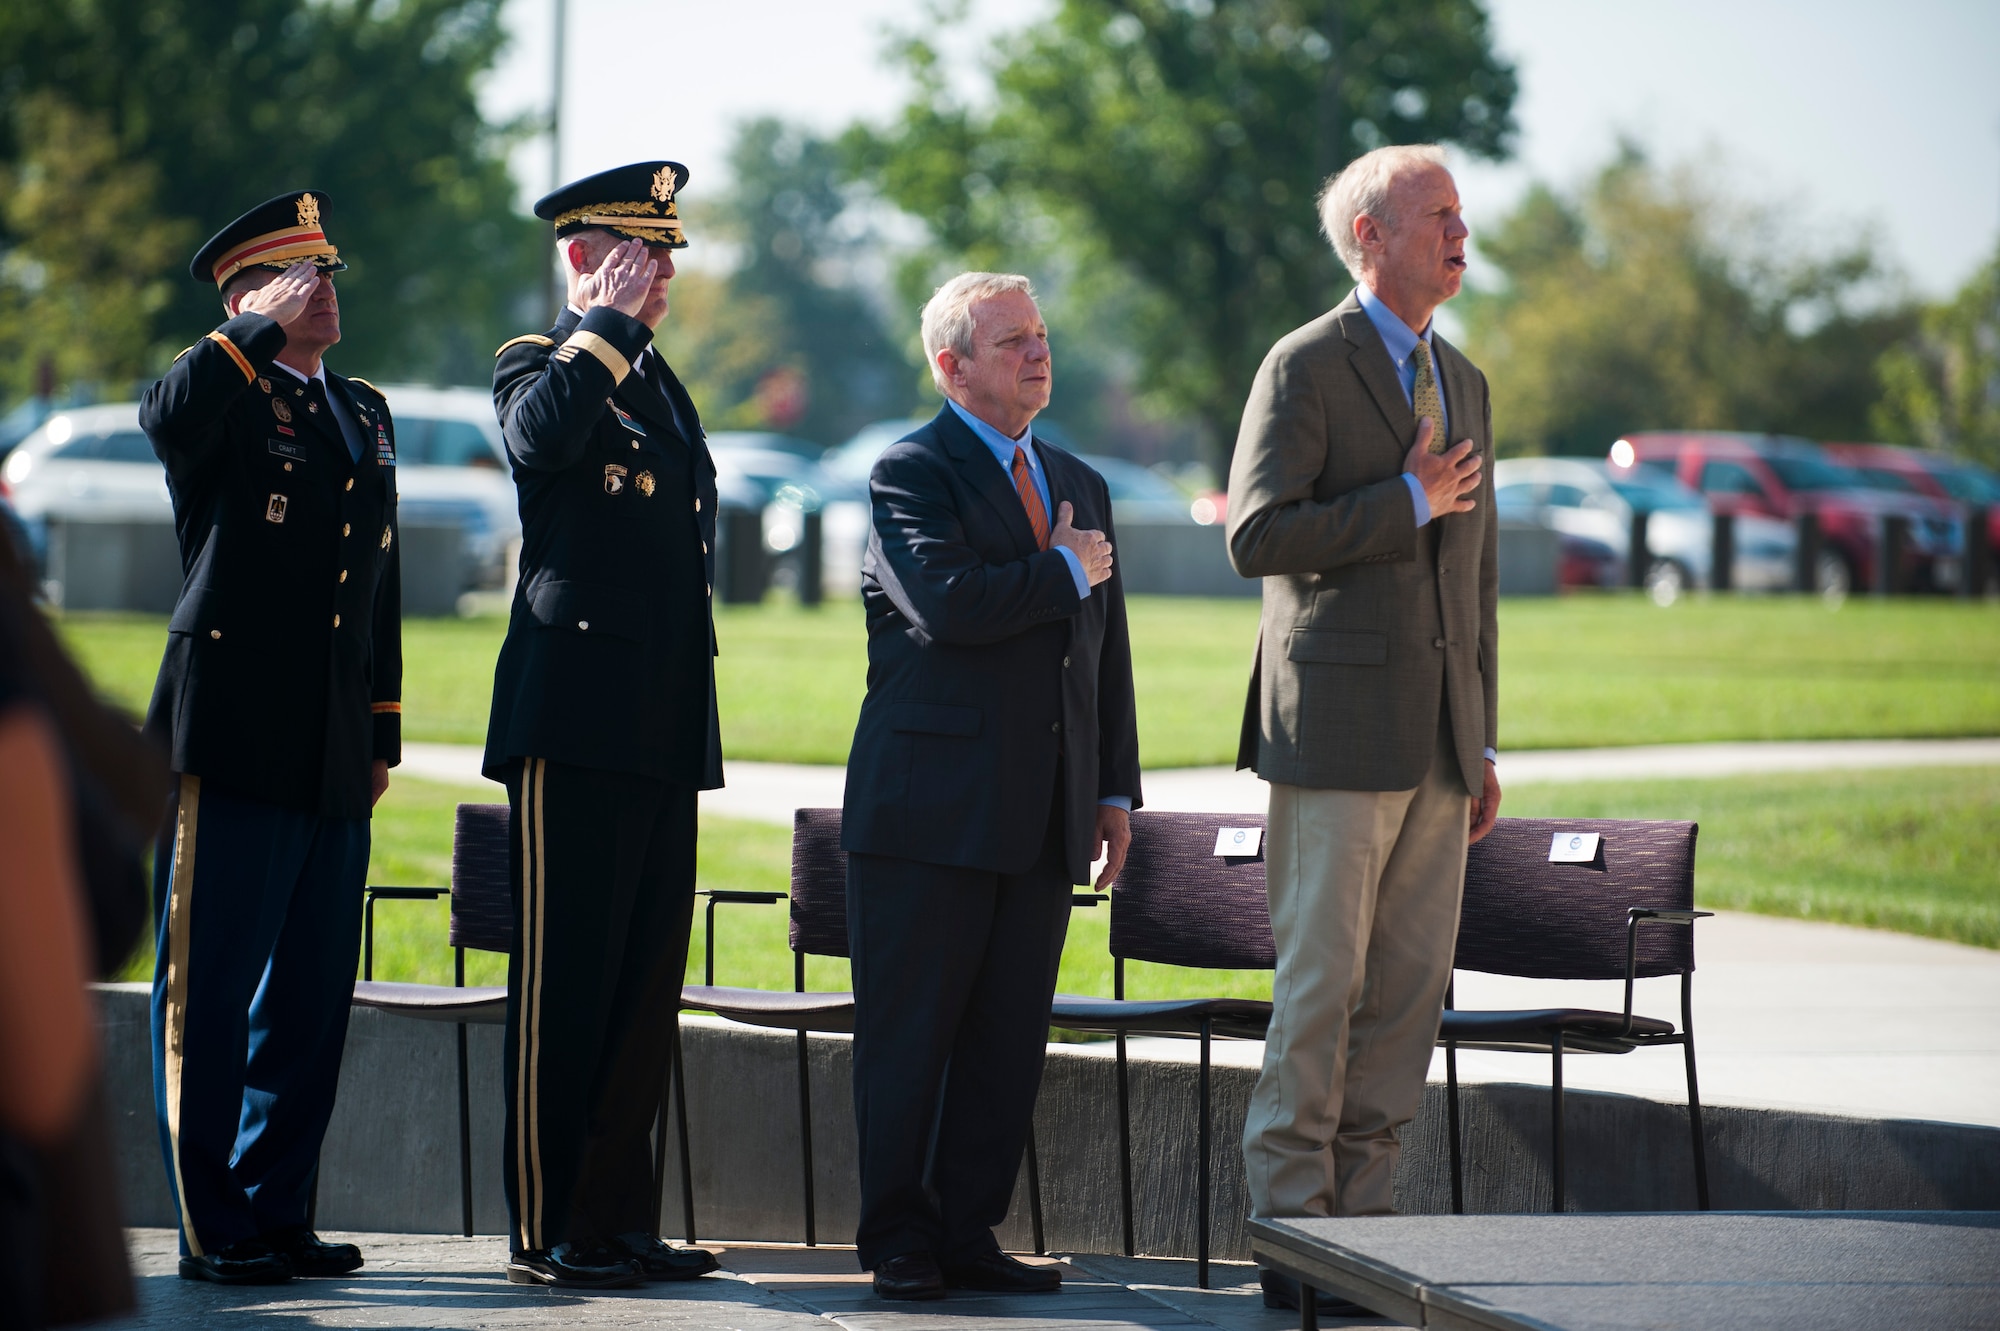 U.S. Army Col. Paul Craft, Defense Information Systems Agency Global Operations Command commander, Lt. Gen. Alan Lynn, DISA director, Sen. Dick Durbin and Ill. Gov. Bruce Rauner observe the national anthem during a ribbon cutting ceremony for the new DISA compound at Scott Air Force Base, Ill., Aug. 11, 2016. Civil leaders from across the state attended the opening of the state of the art compound. (U.S. Air Force photo by Staff Sgt. Clayton Lenhardt/Released)